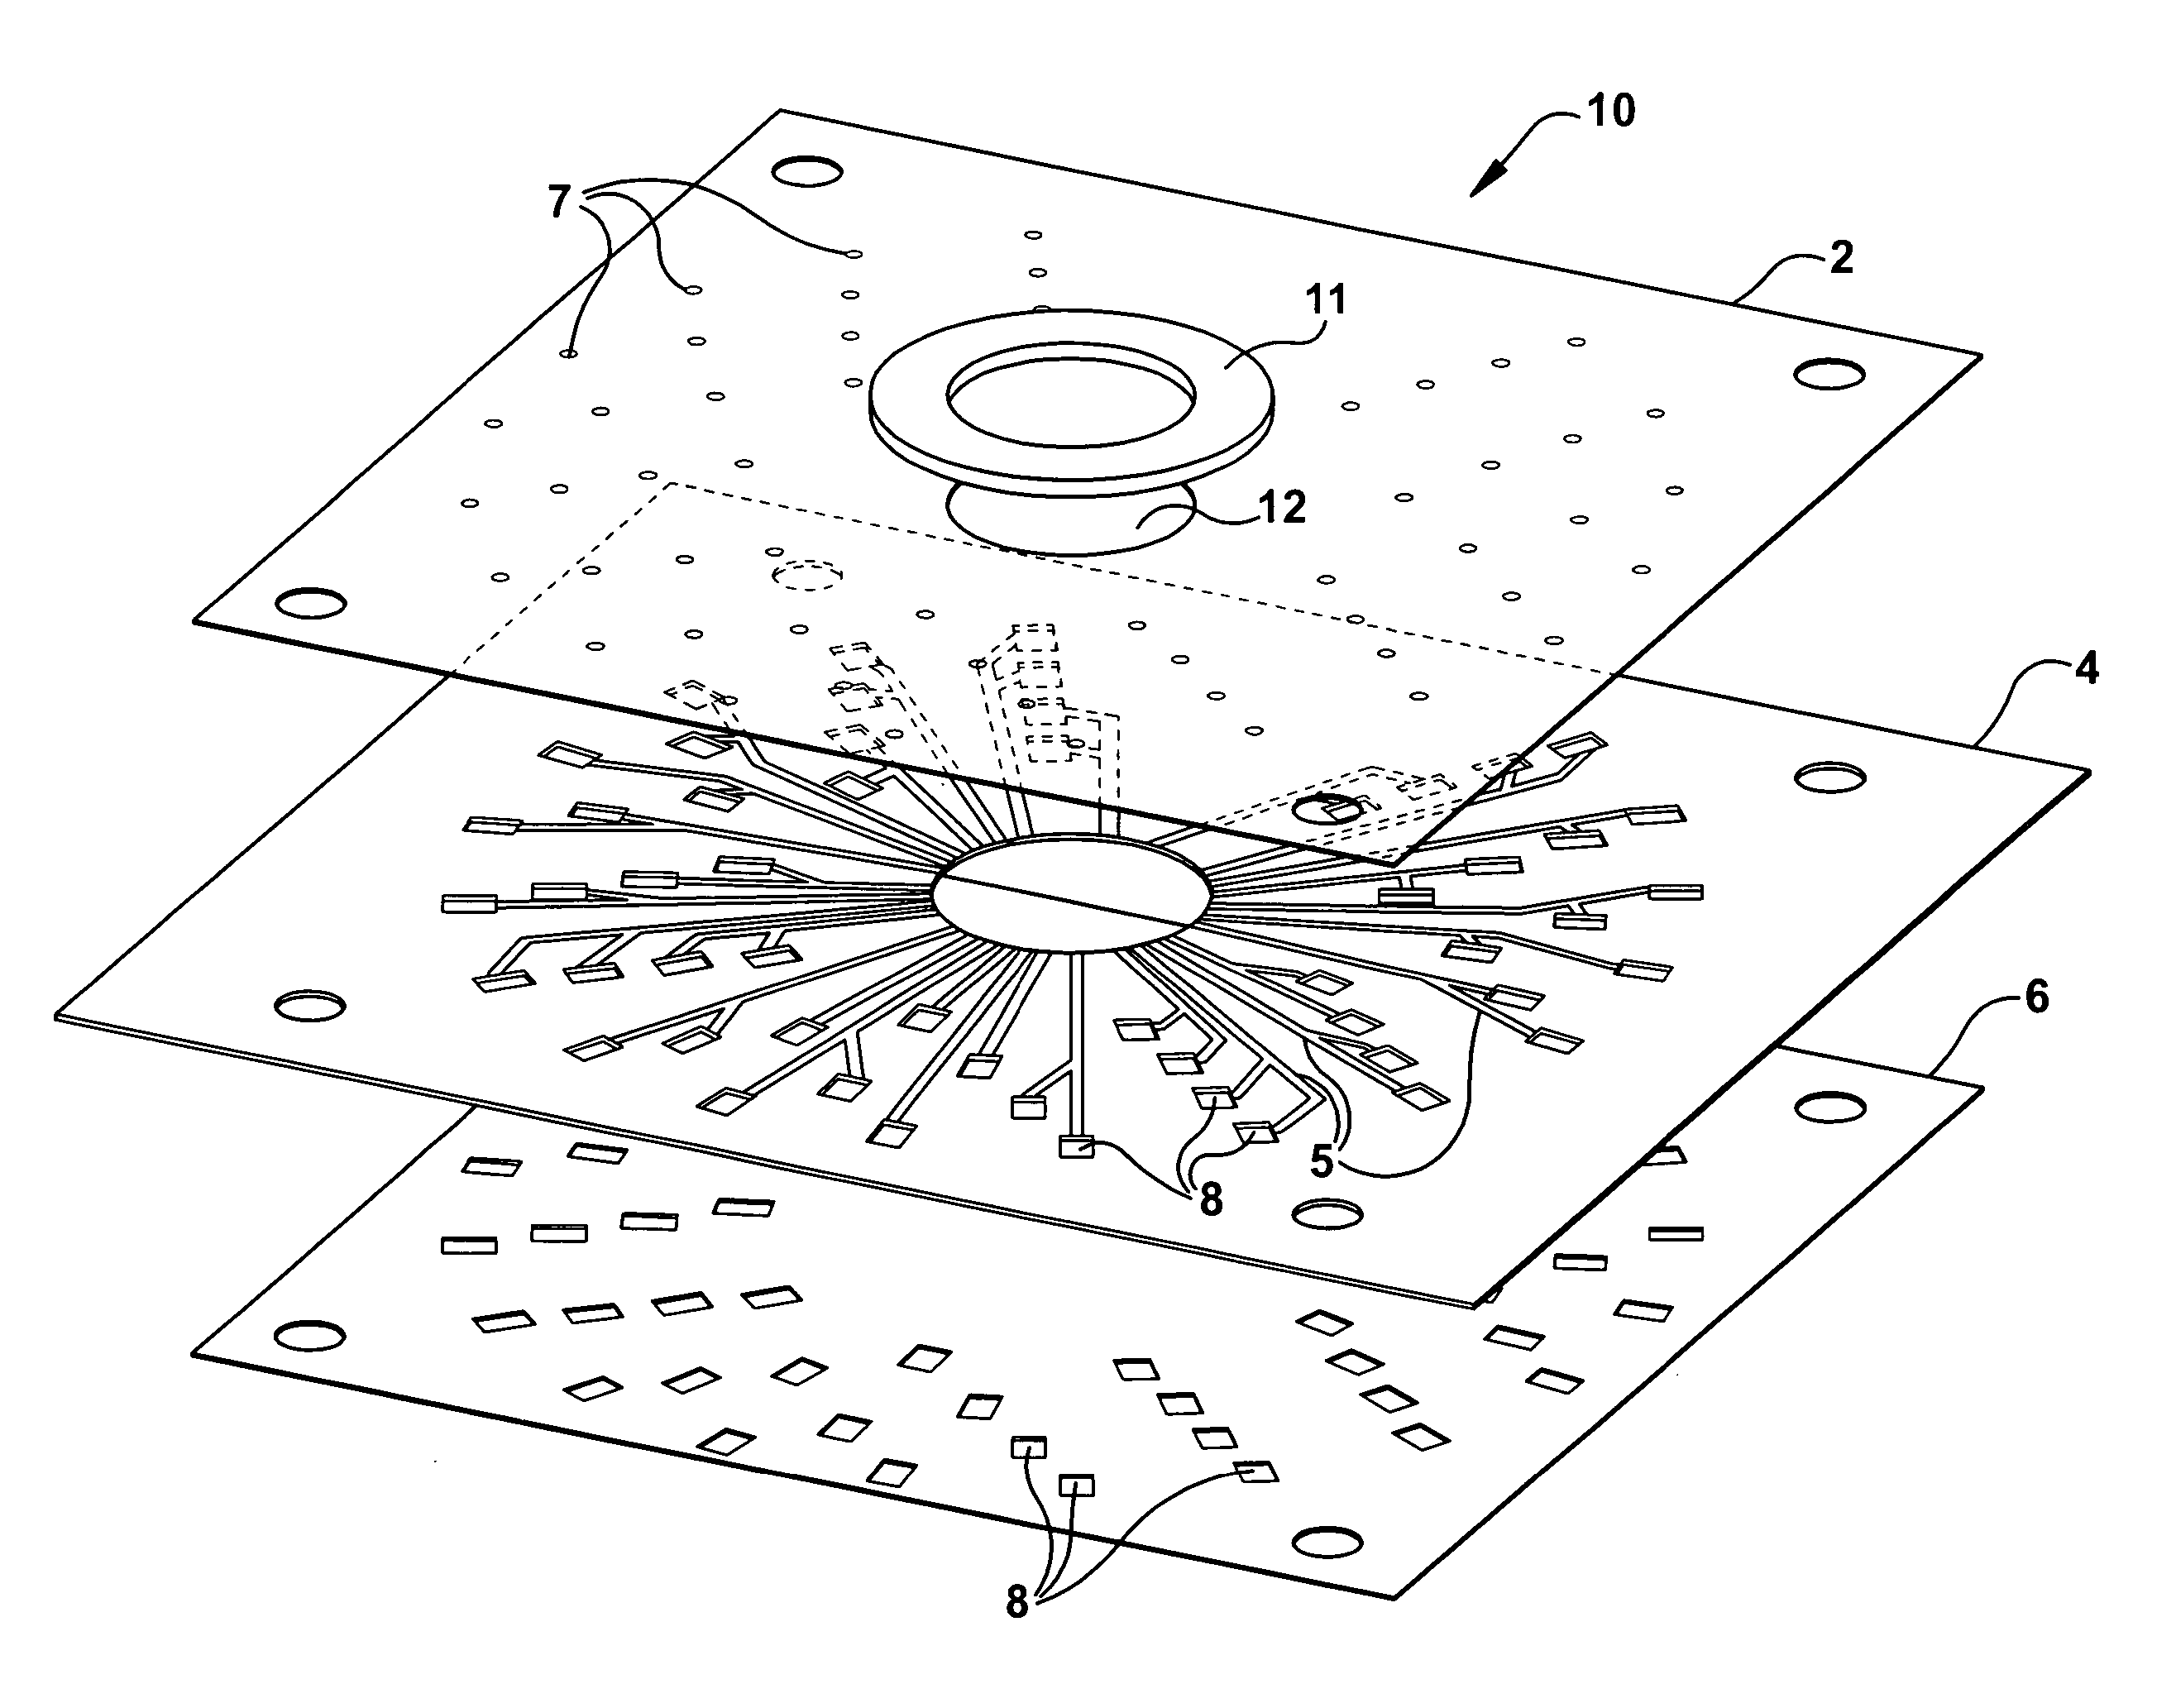 Methods and systems for delivery of fluidic samples to sensor arrays